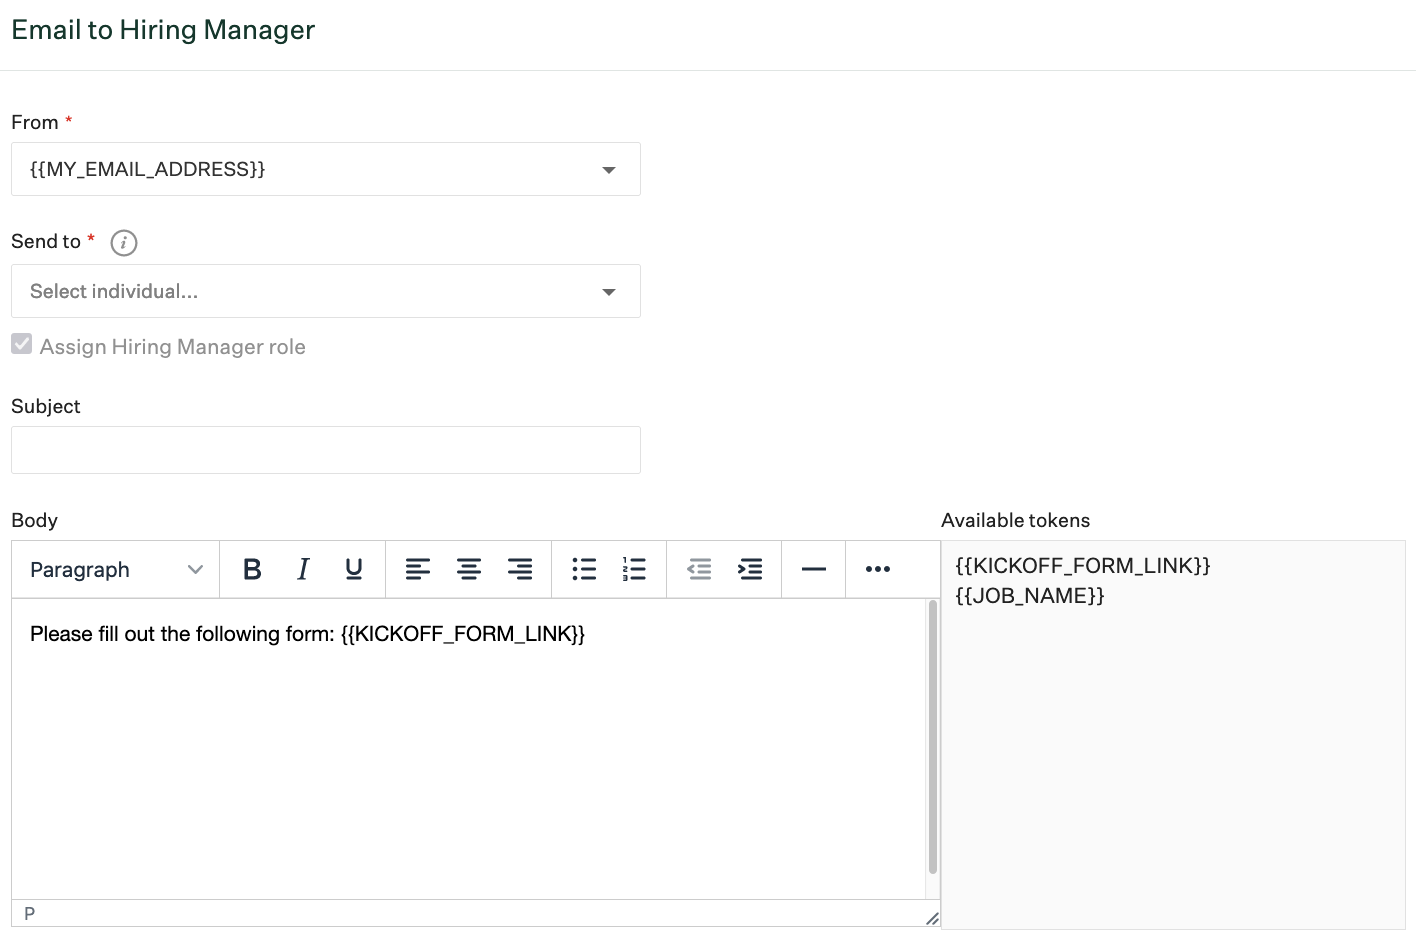 Screenshot-of-hiring-manager-email.png